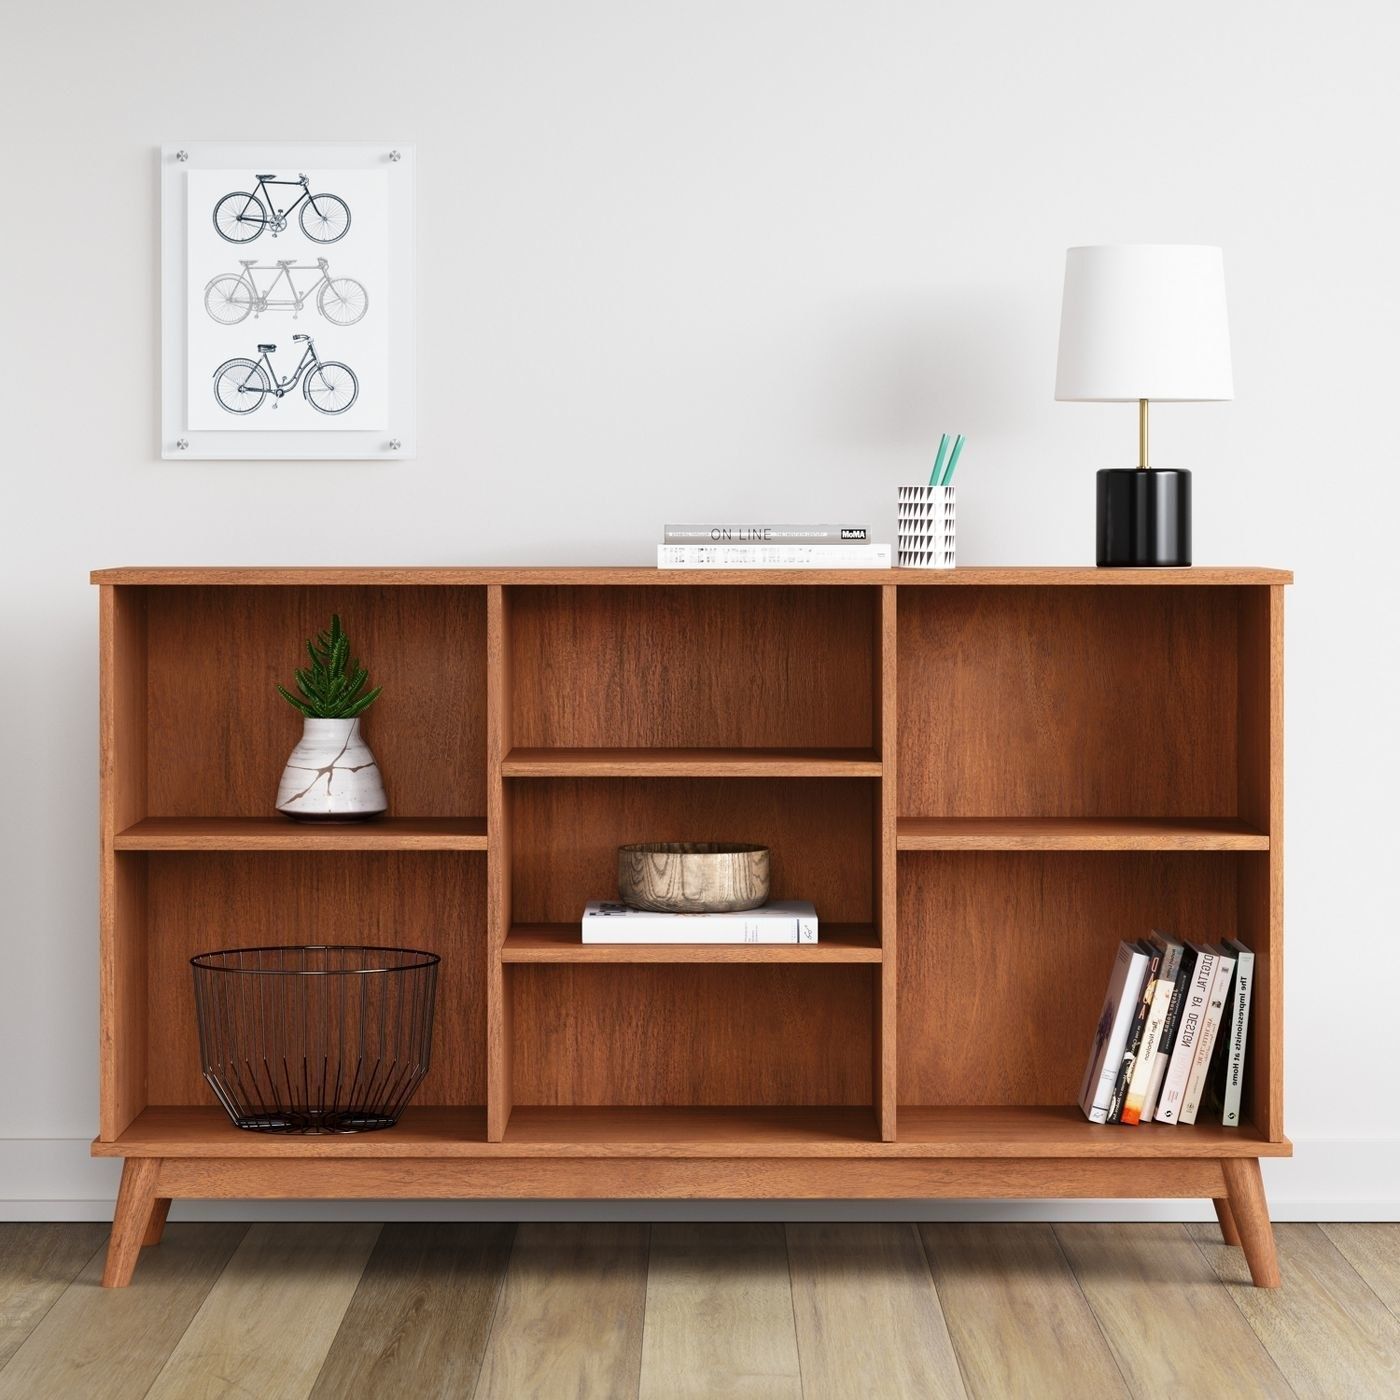 What are the advantages for getting
  horizontal bookcase